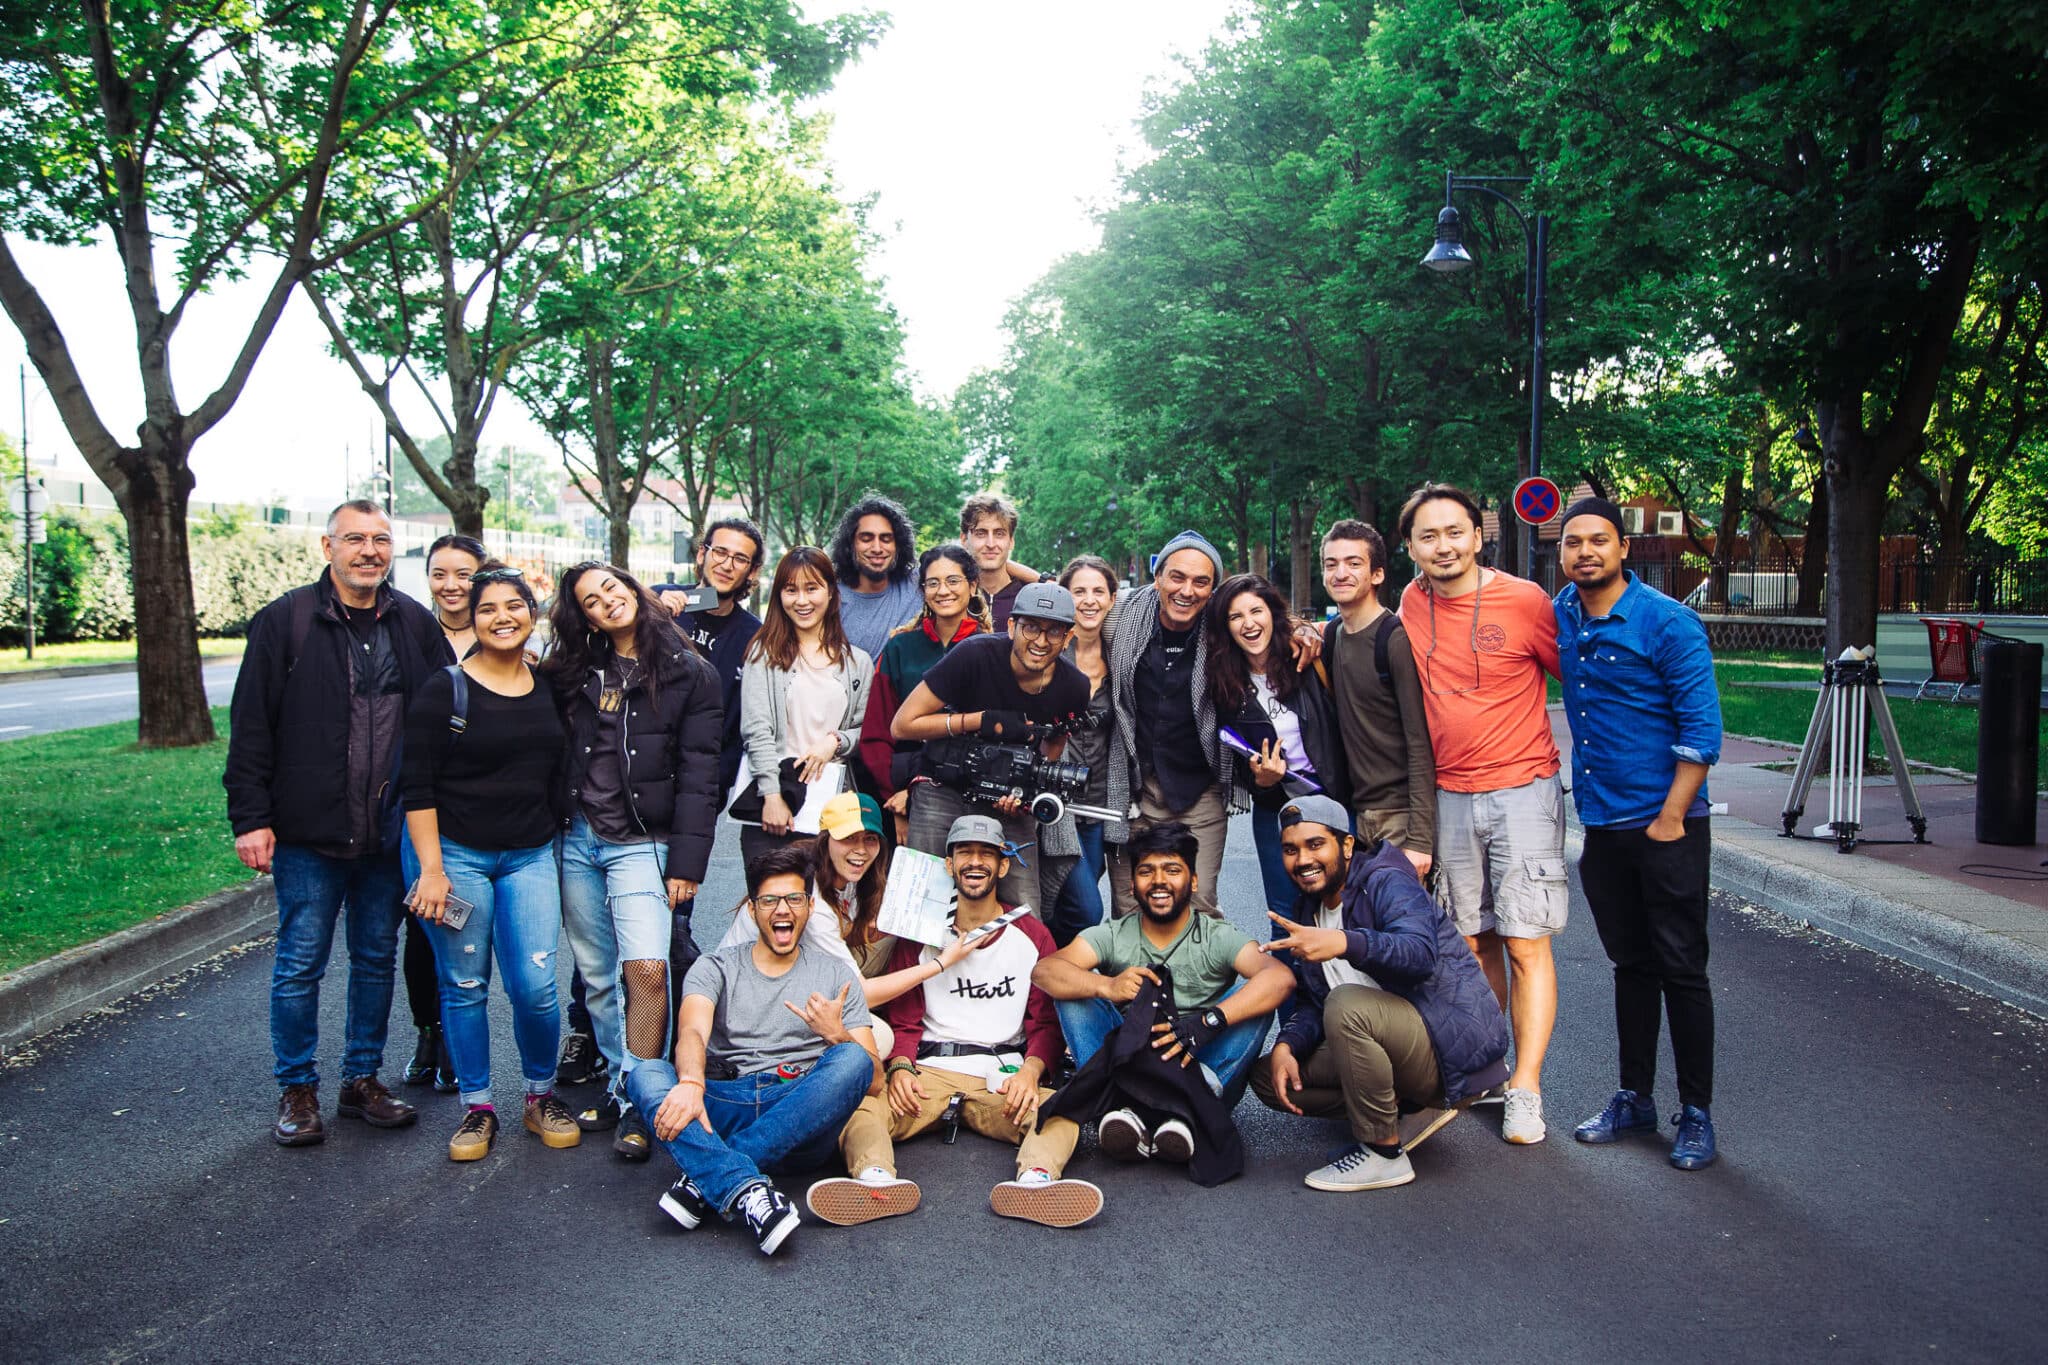 EICAR welcomes every year international students and counts over 60 nationalities in its student body